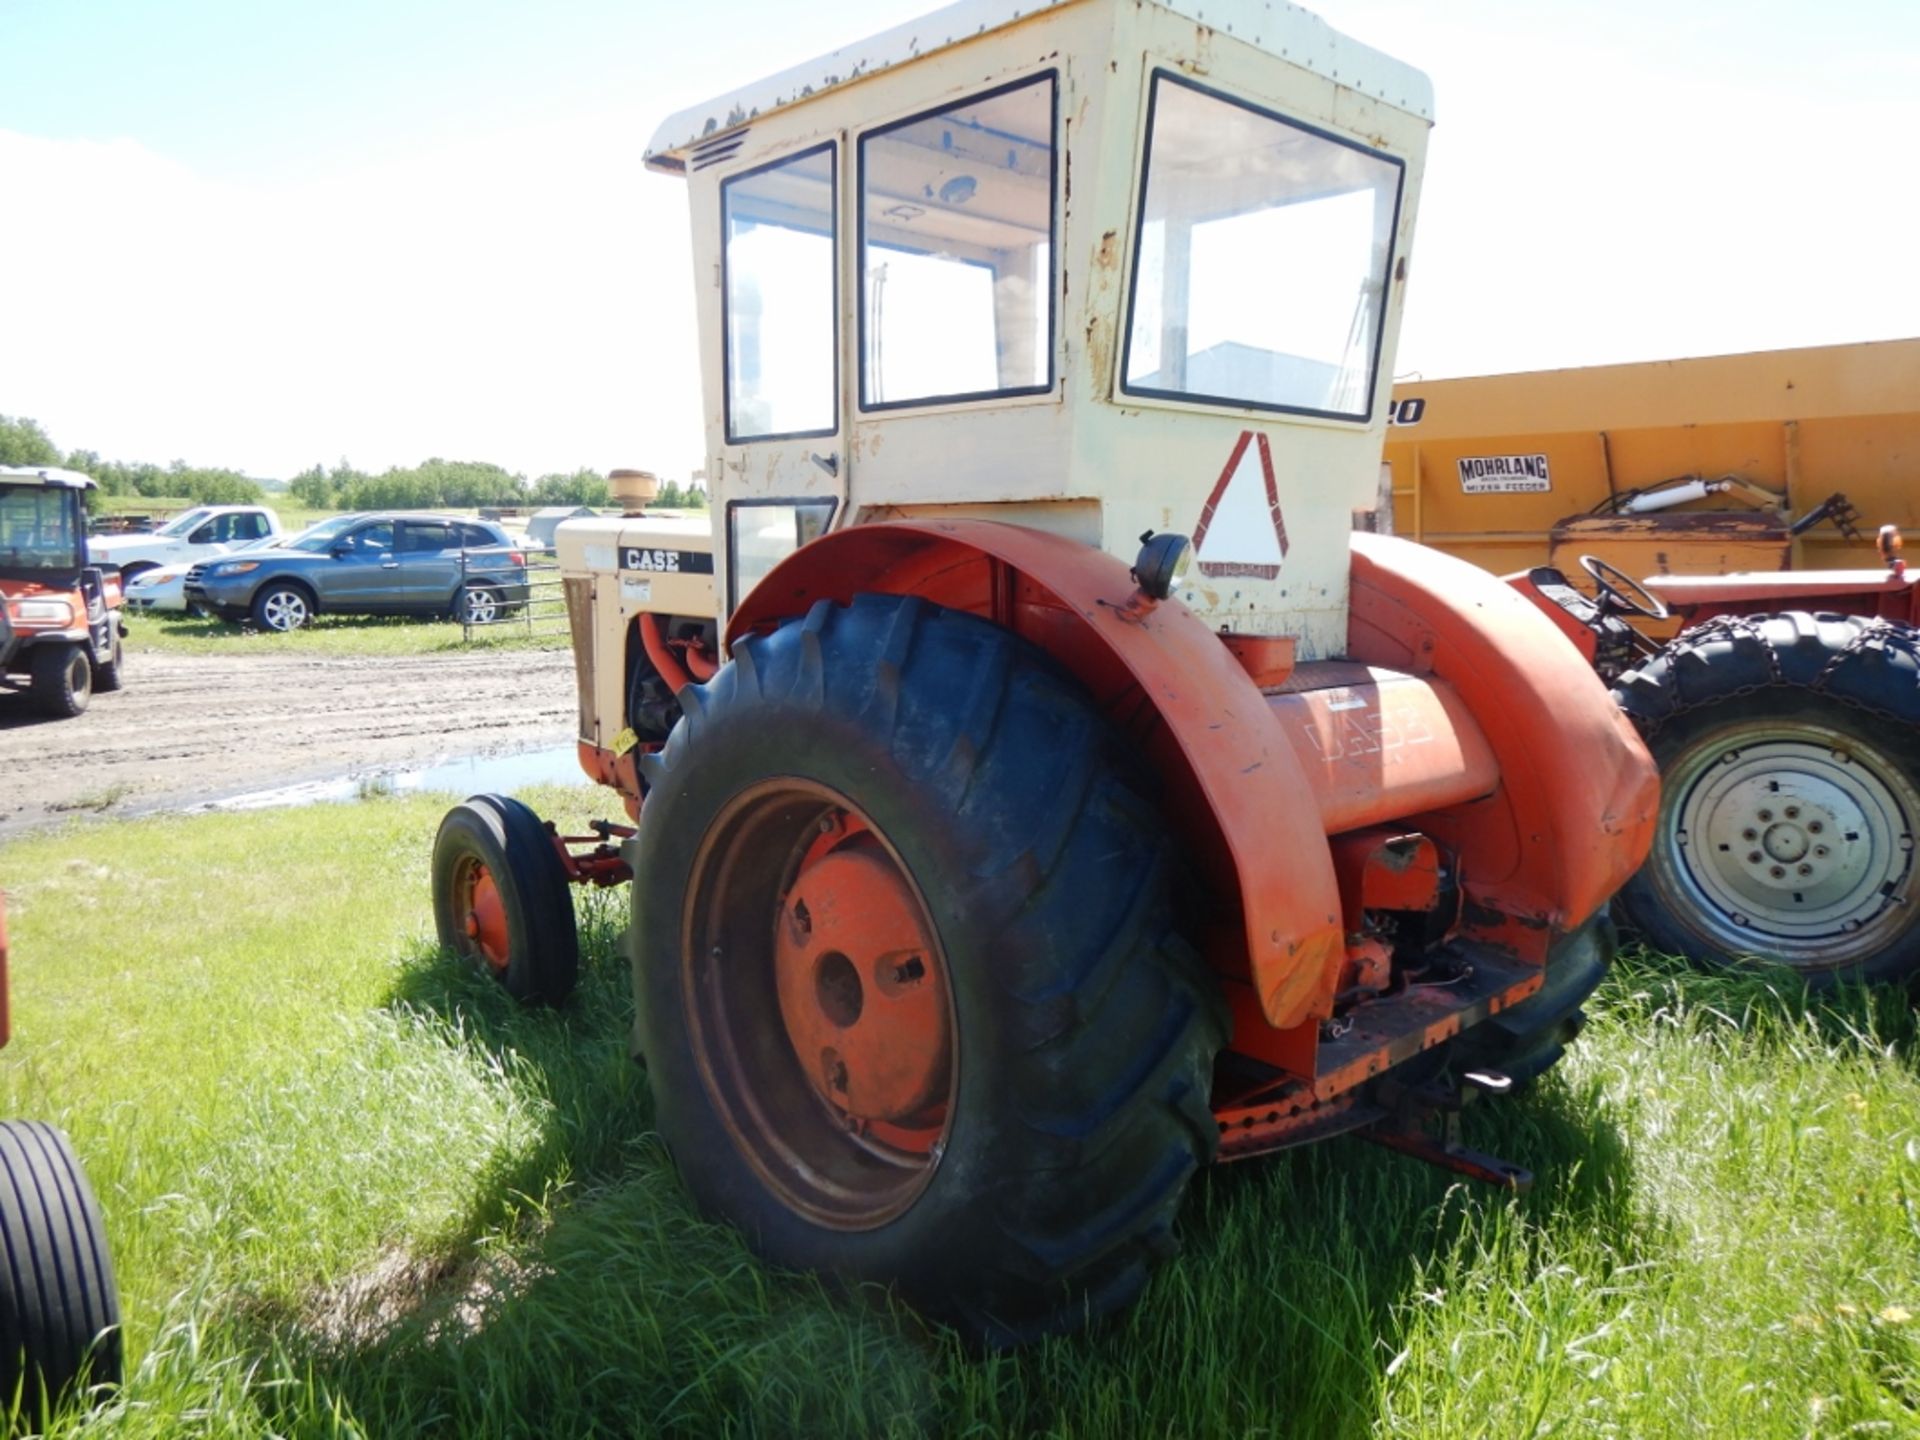 CASE 930 COMFORT KING TRACTOR W/ CAB, DIESEL ENGINE, 18.4X30 RUBBER, 5140 HR SHOWING, S/N 8250981 - Image 8 of 12